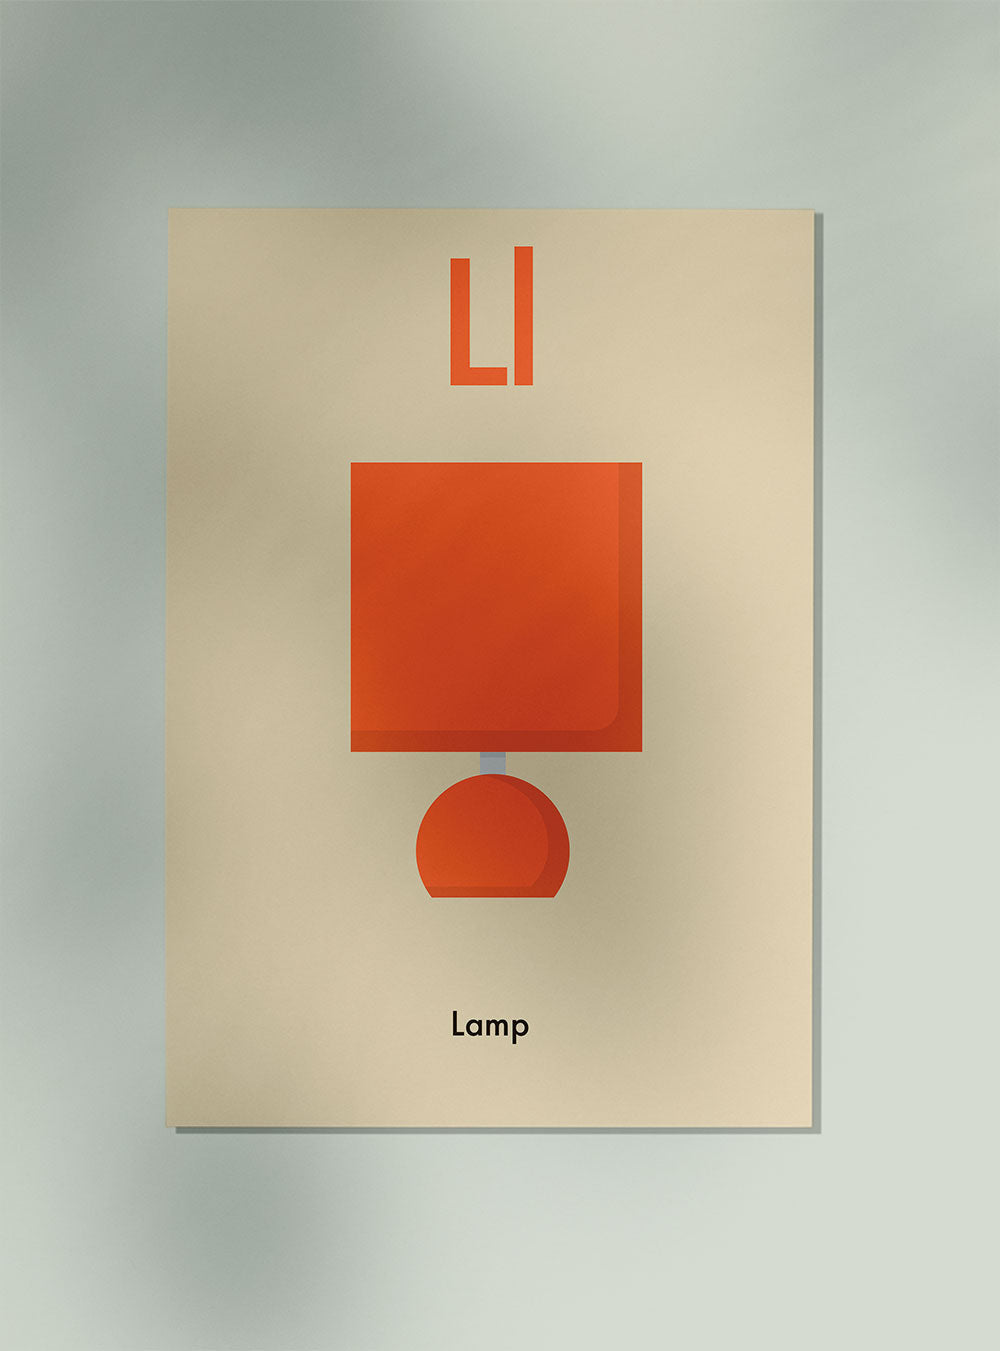 L for Lamp - Children's Alphabet Poster in English